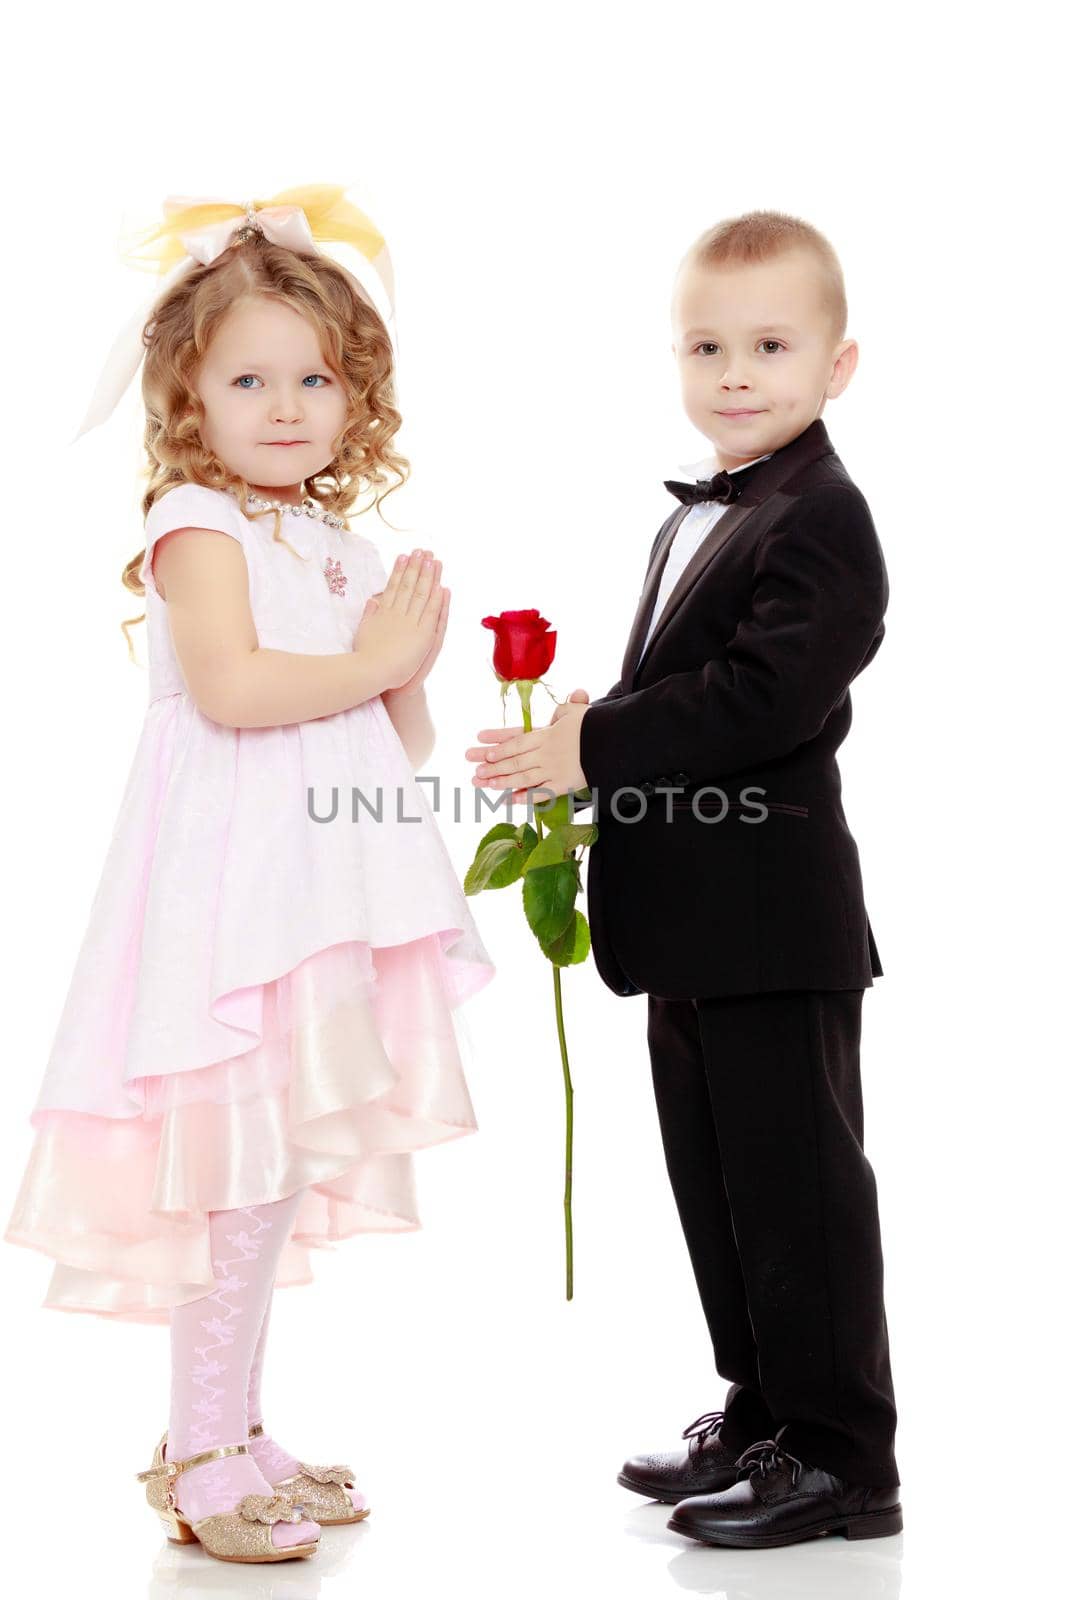 Little boy in black suit with bow tie gives a big red rose charming little girl.Isolated on white background.